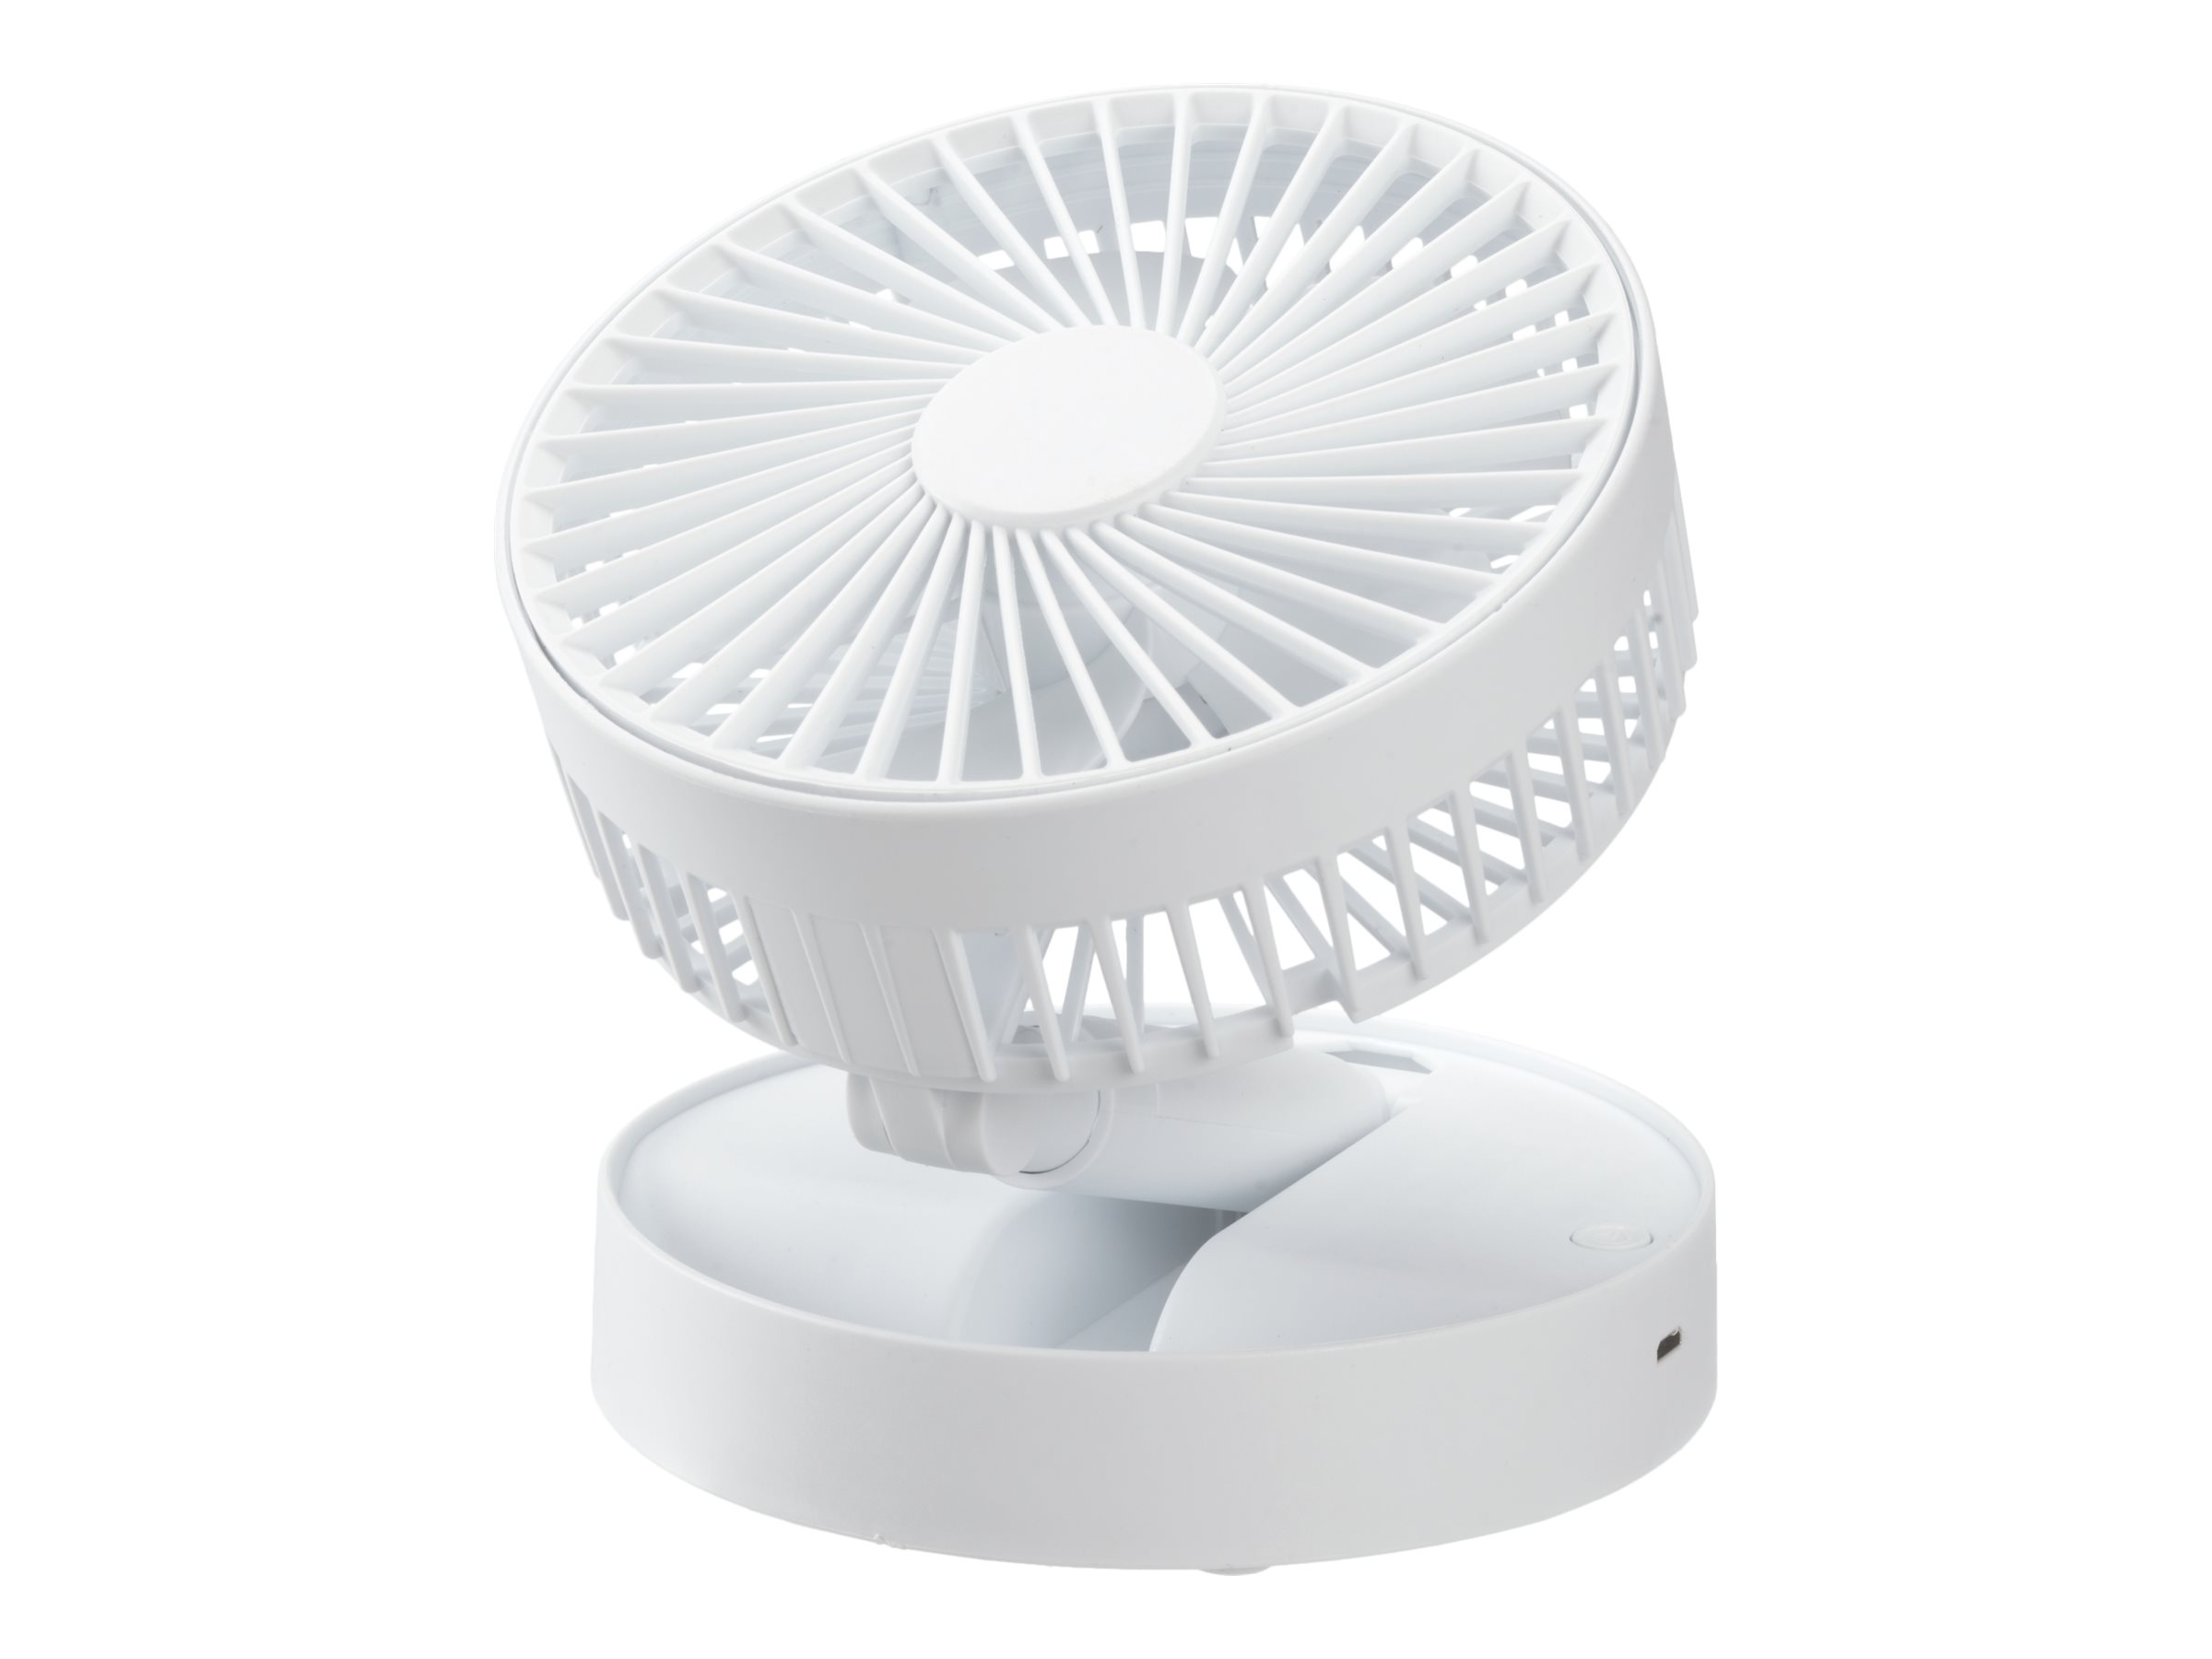 Northern Chill Portable Cooling Fan